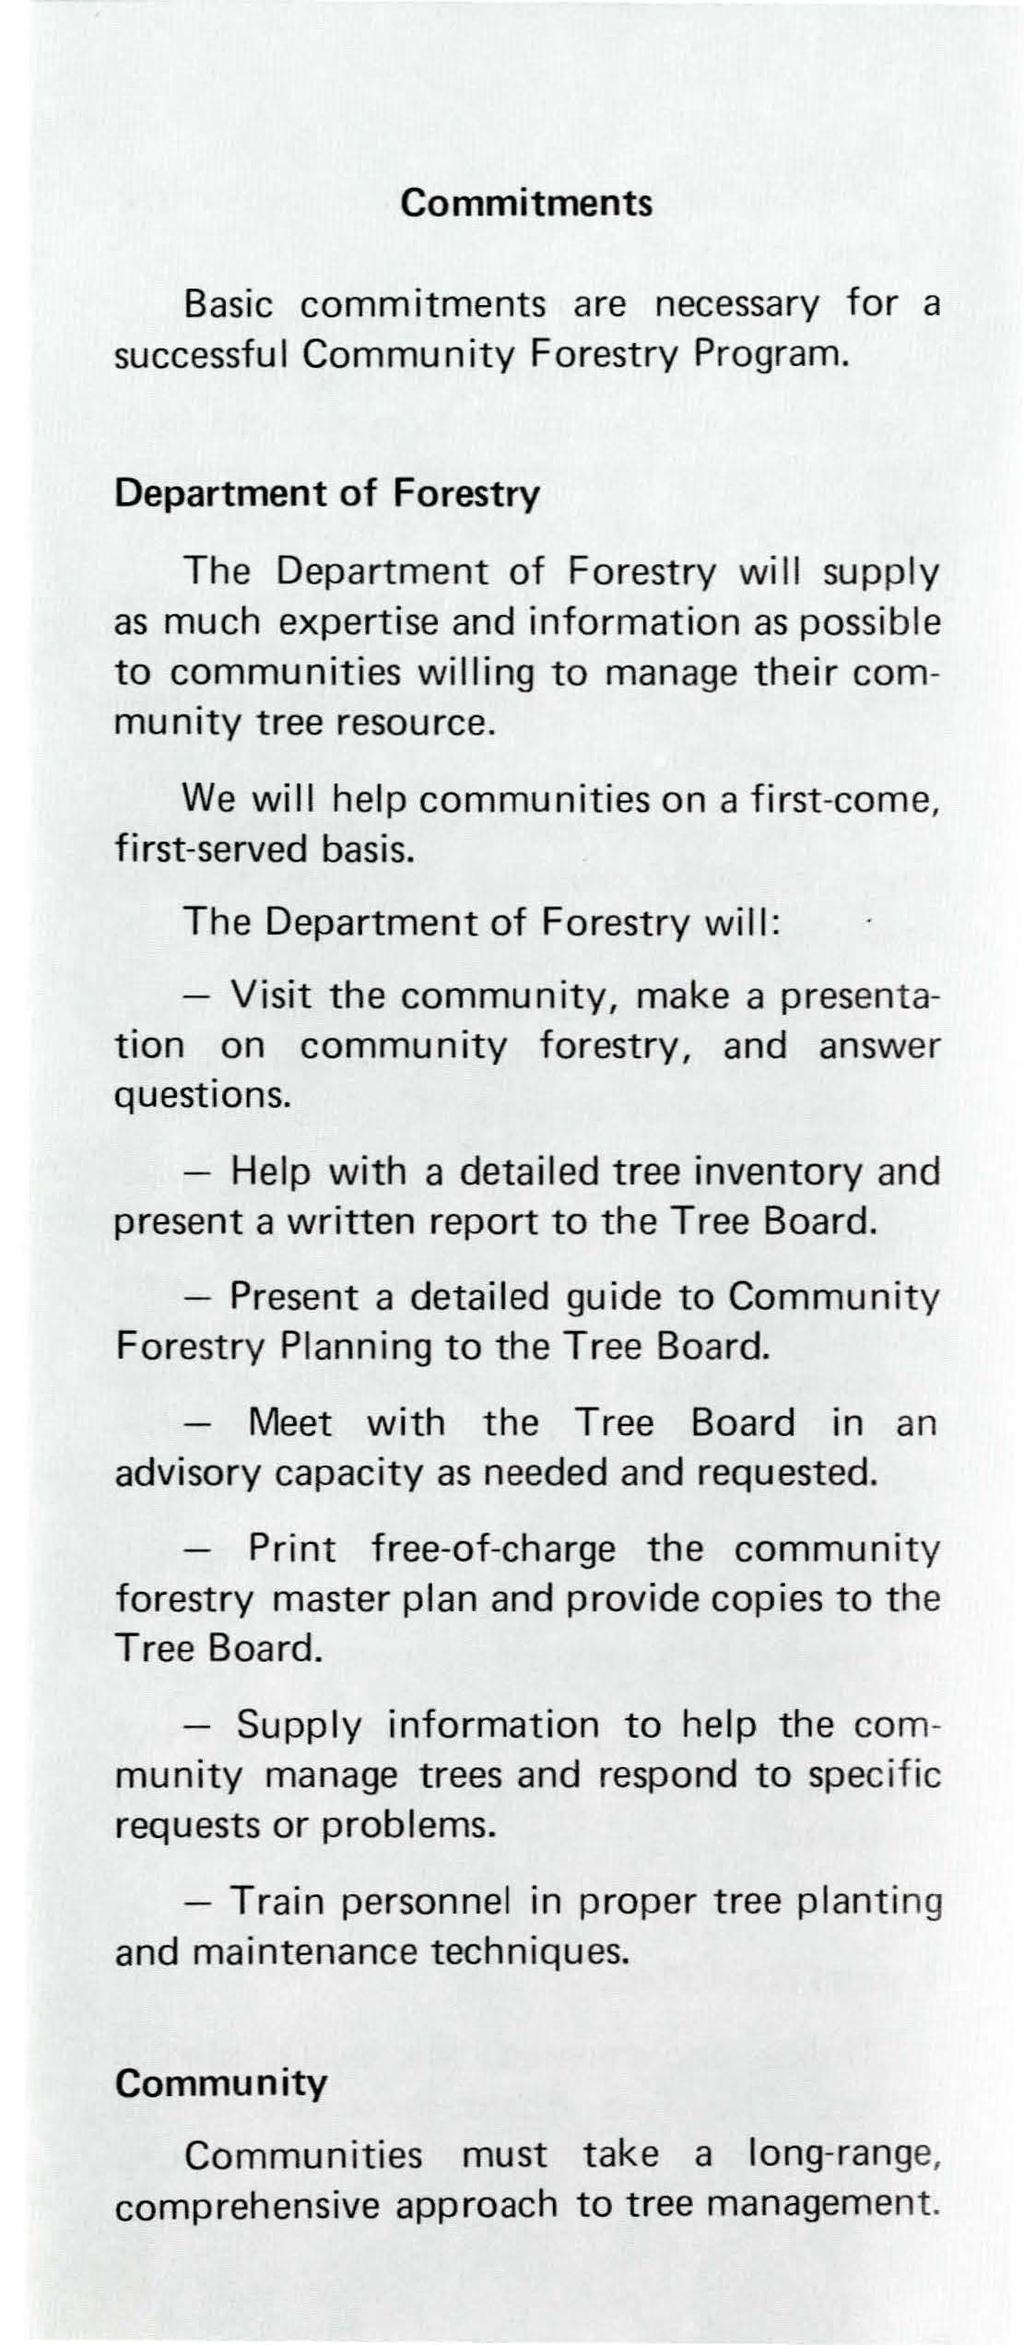 Commitments Basic commitments are necessary for a successful Community Forestry Program.